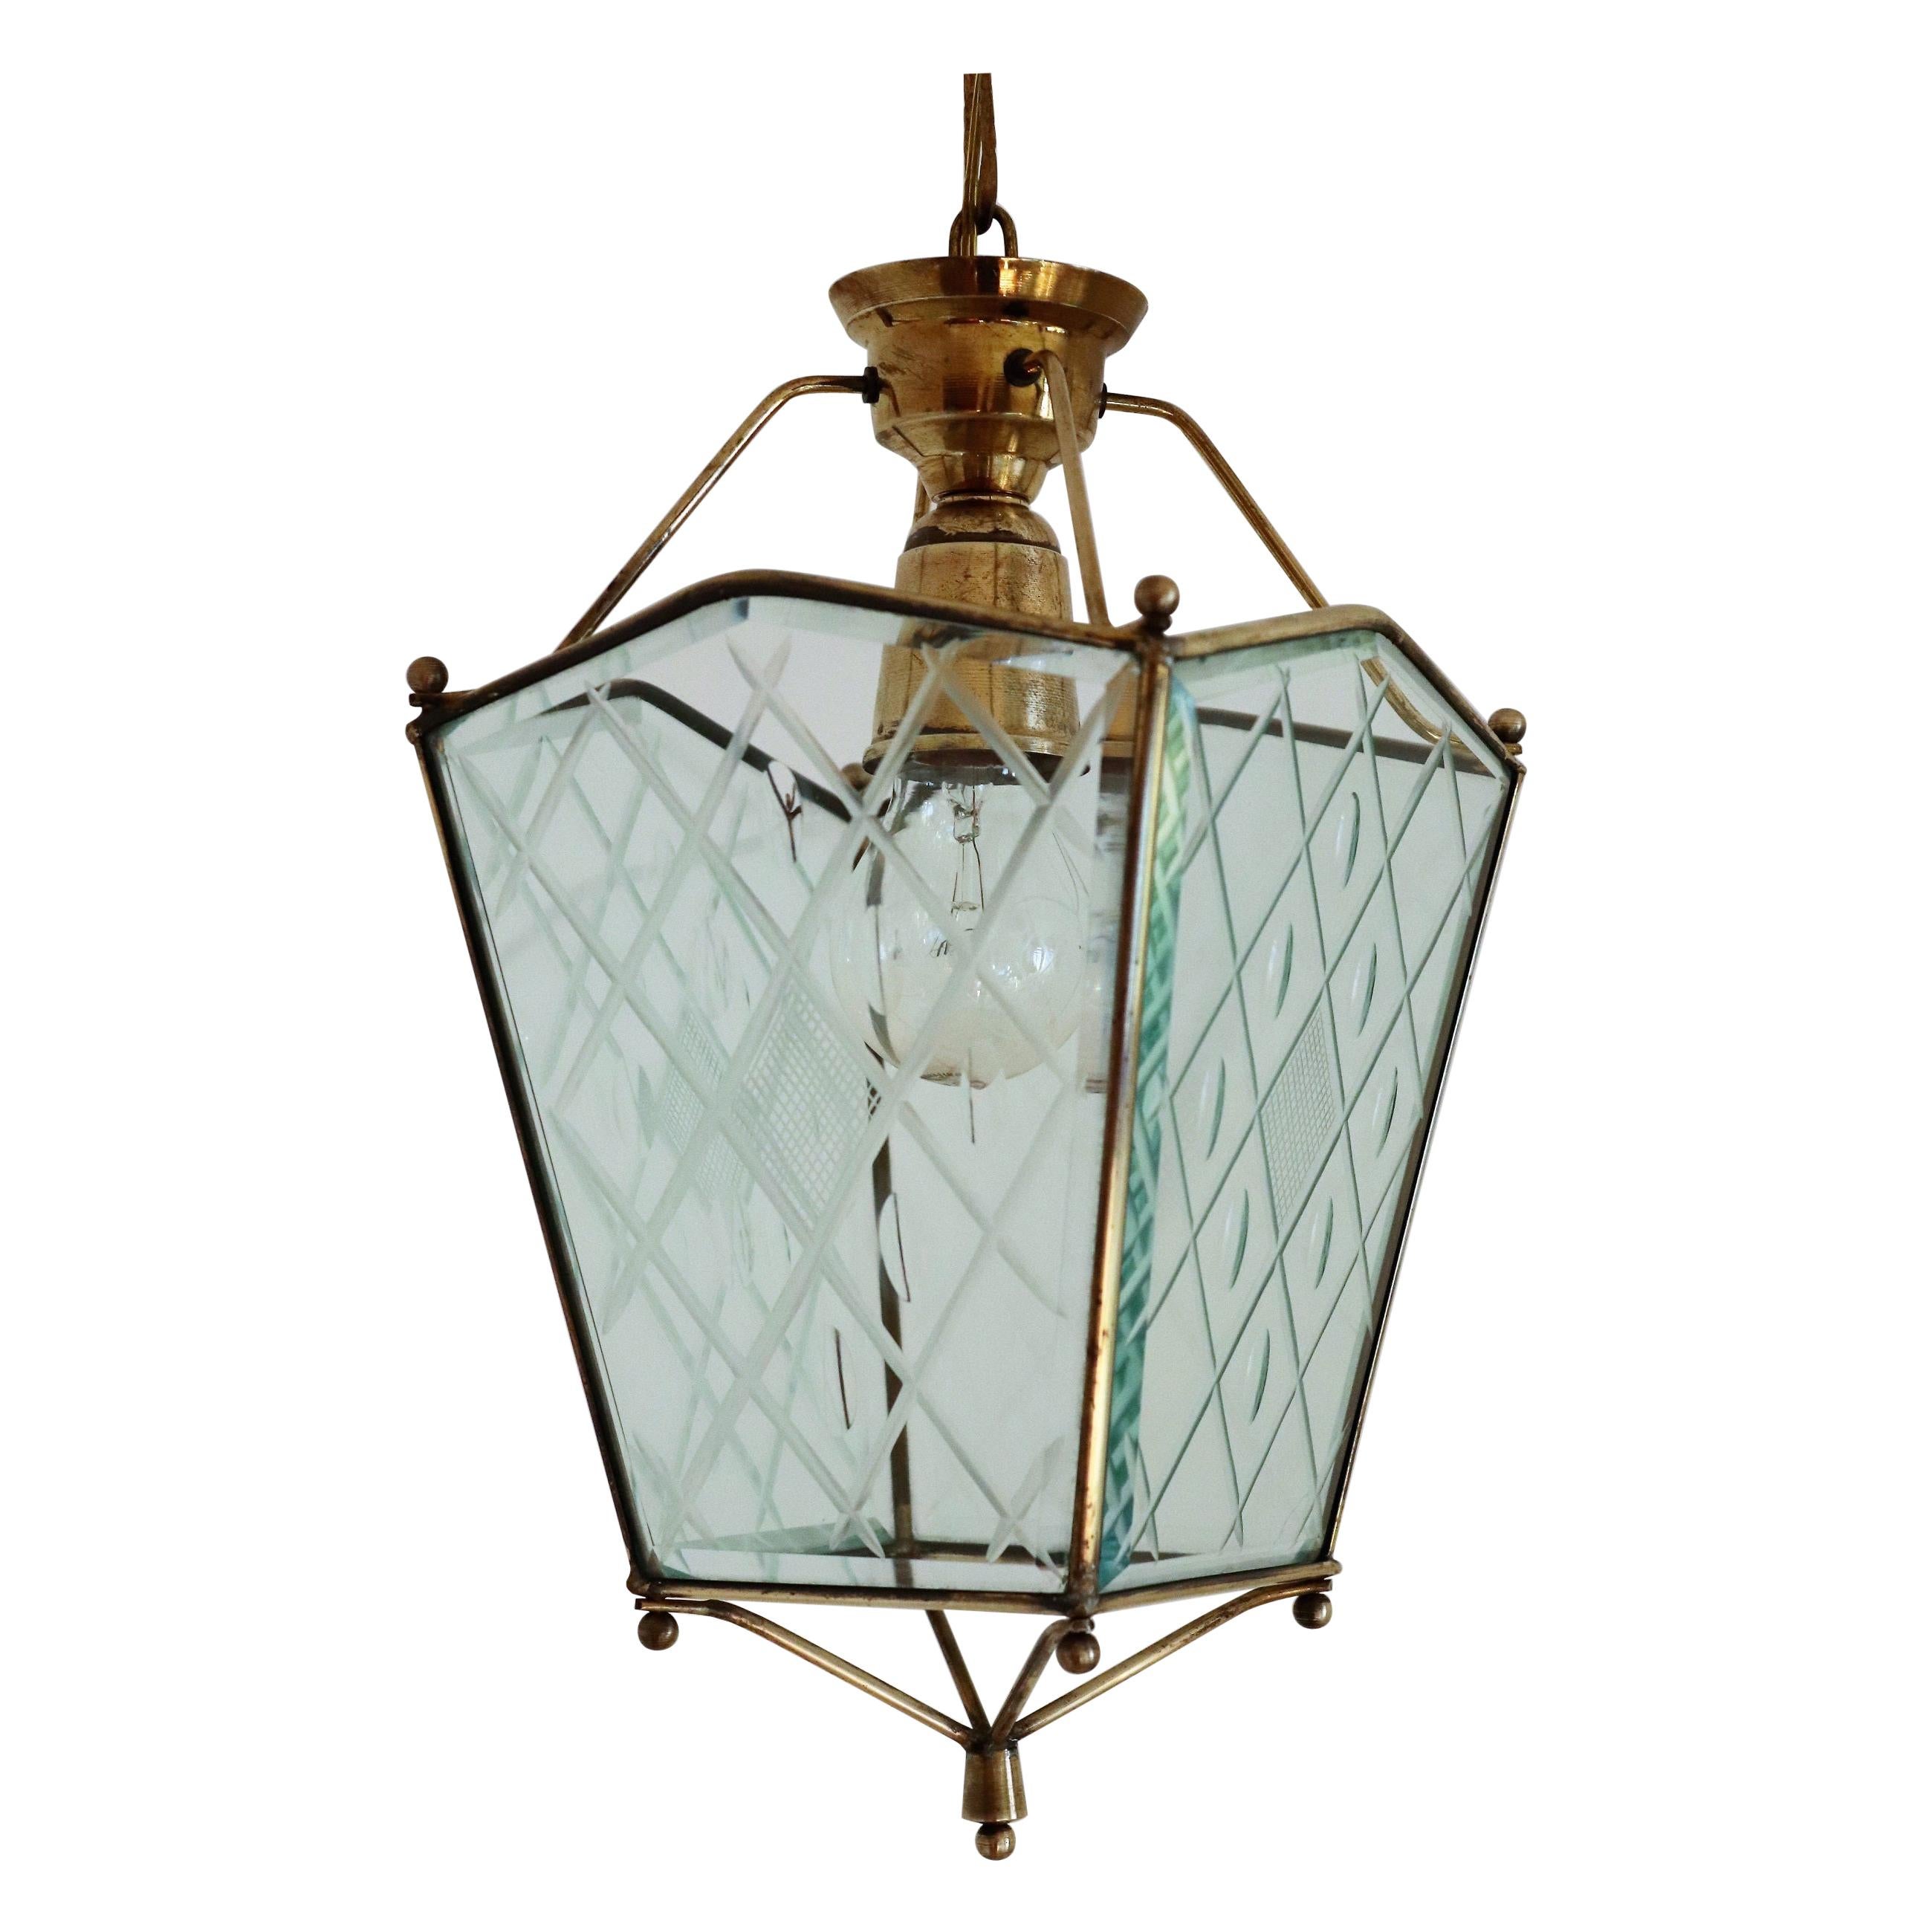 Italian Vintage Lantern in Crystal Cut Glass and Brass, 1950s